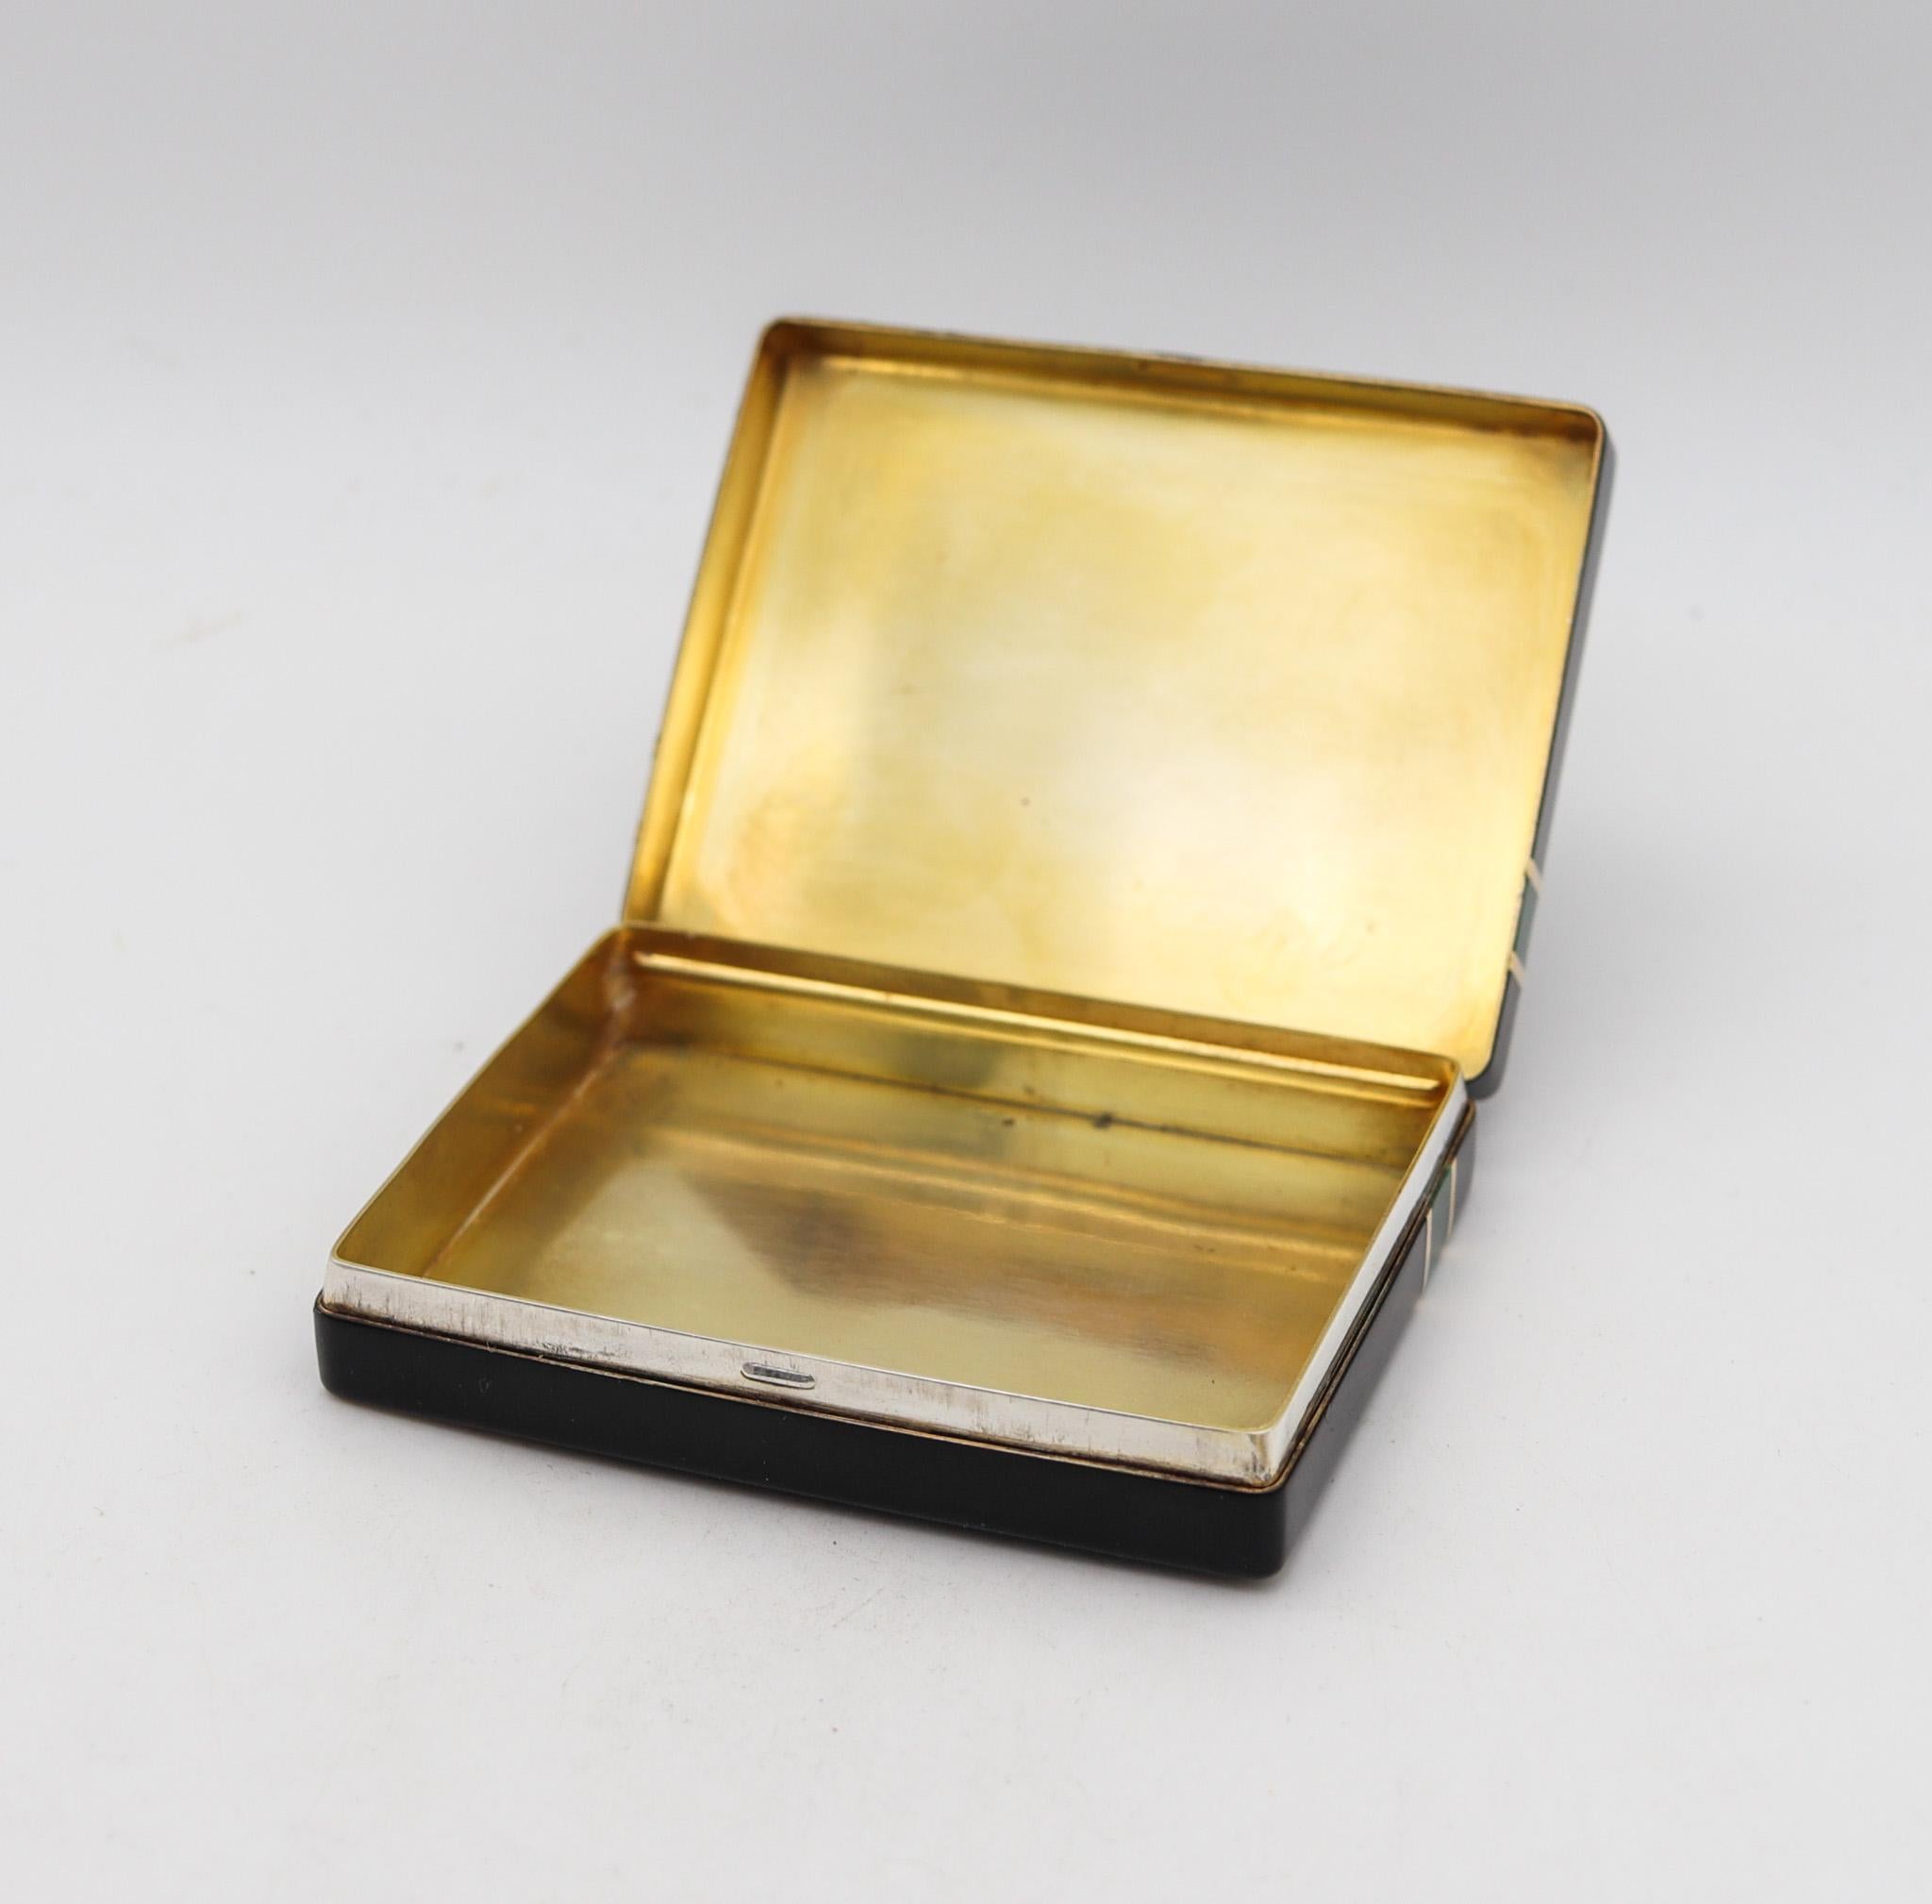 Hand-Crafted Wordley Allsopp & Bliss 1930 Art Deco Lacquered Box In 14Kt Gold And Sterling For Sale